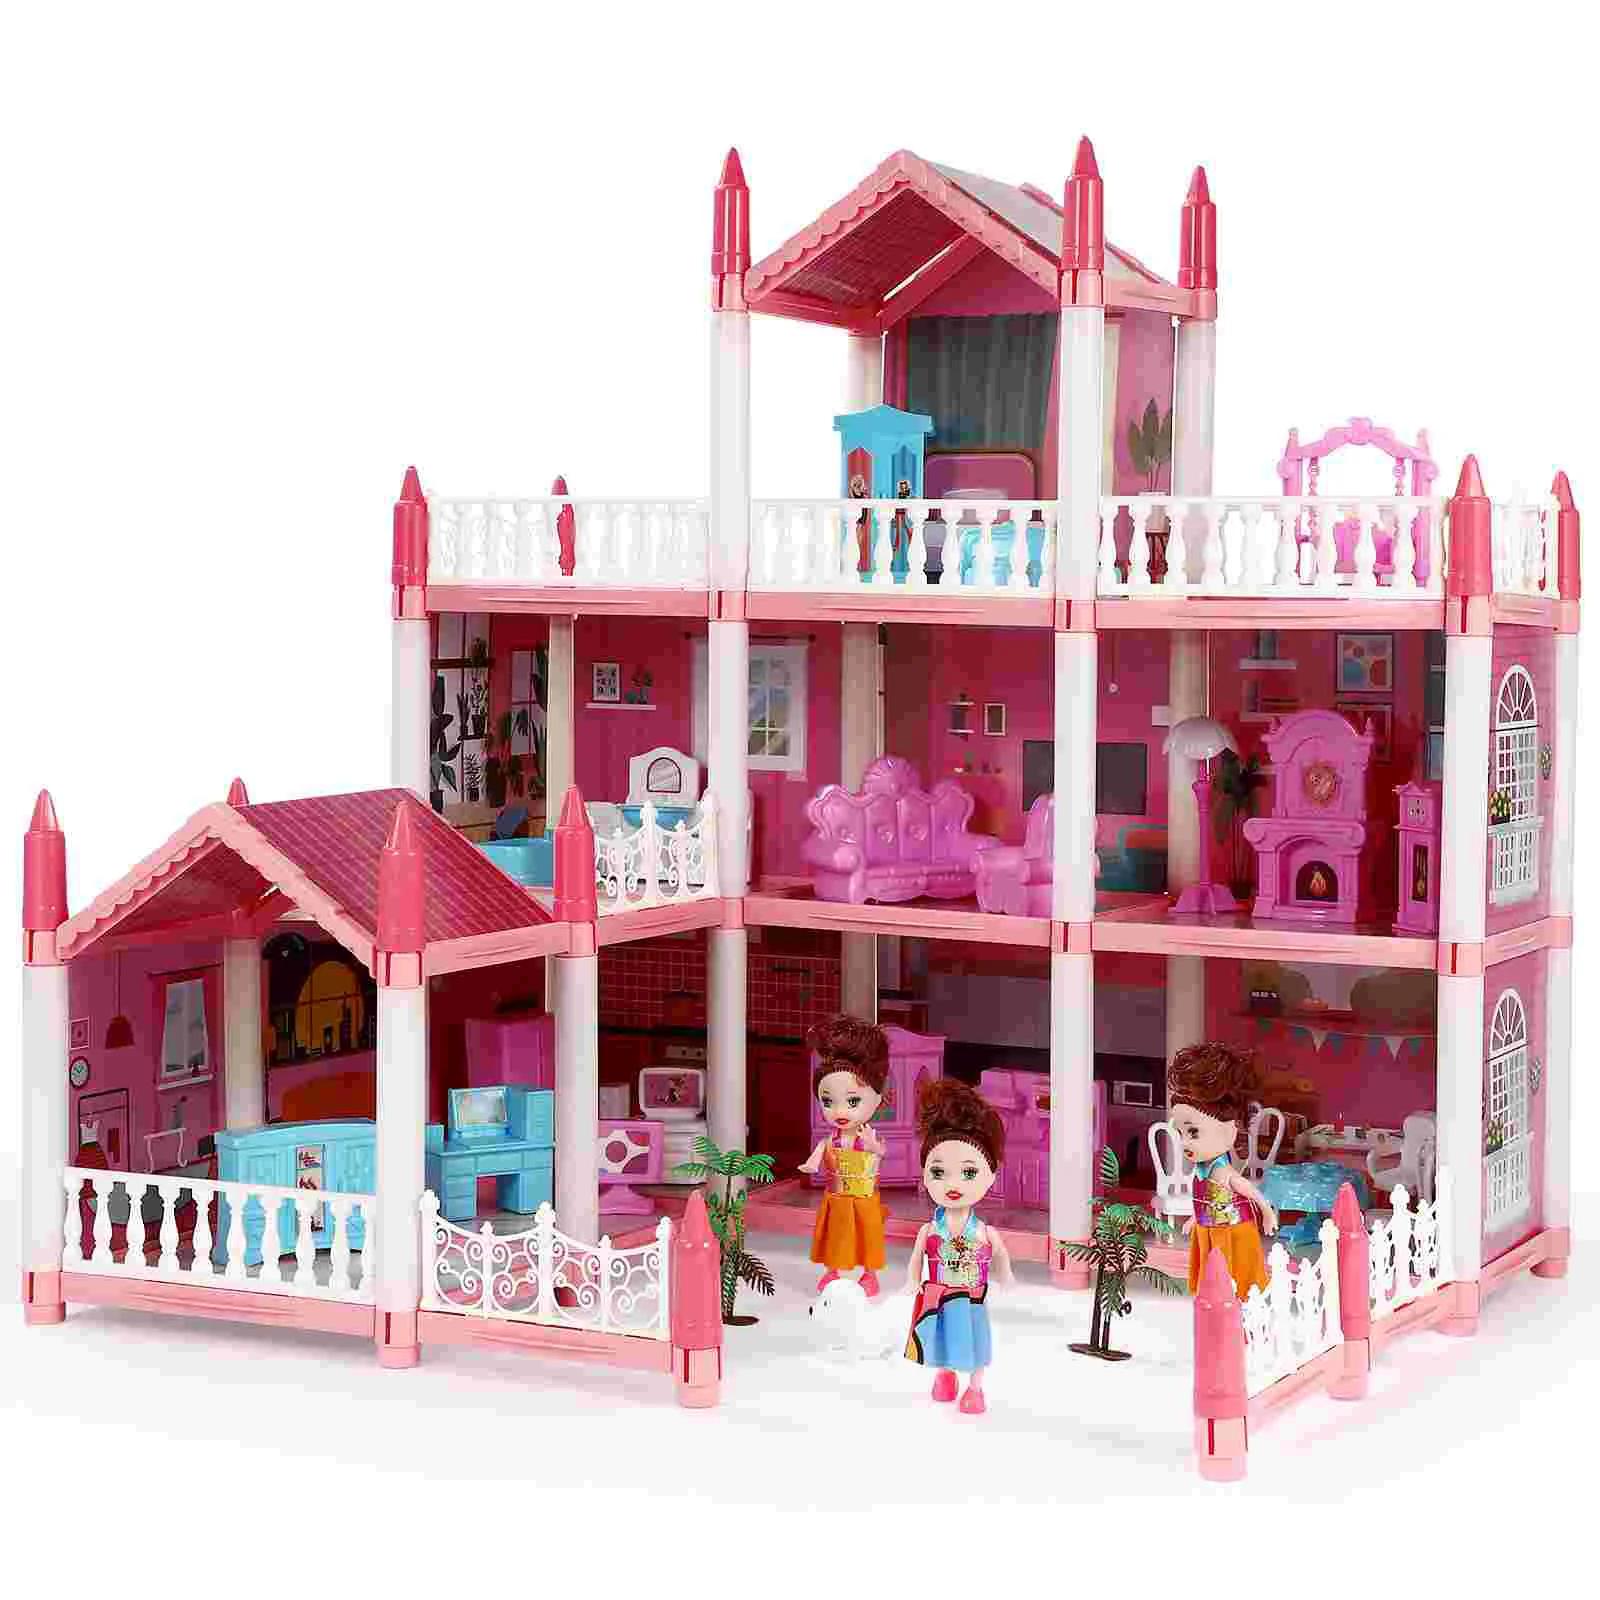 Girl Children's Play House Toy Girl's Imitation 9 Rooms Pink Princess Toys Pp With 3 Stories 100 selected stories